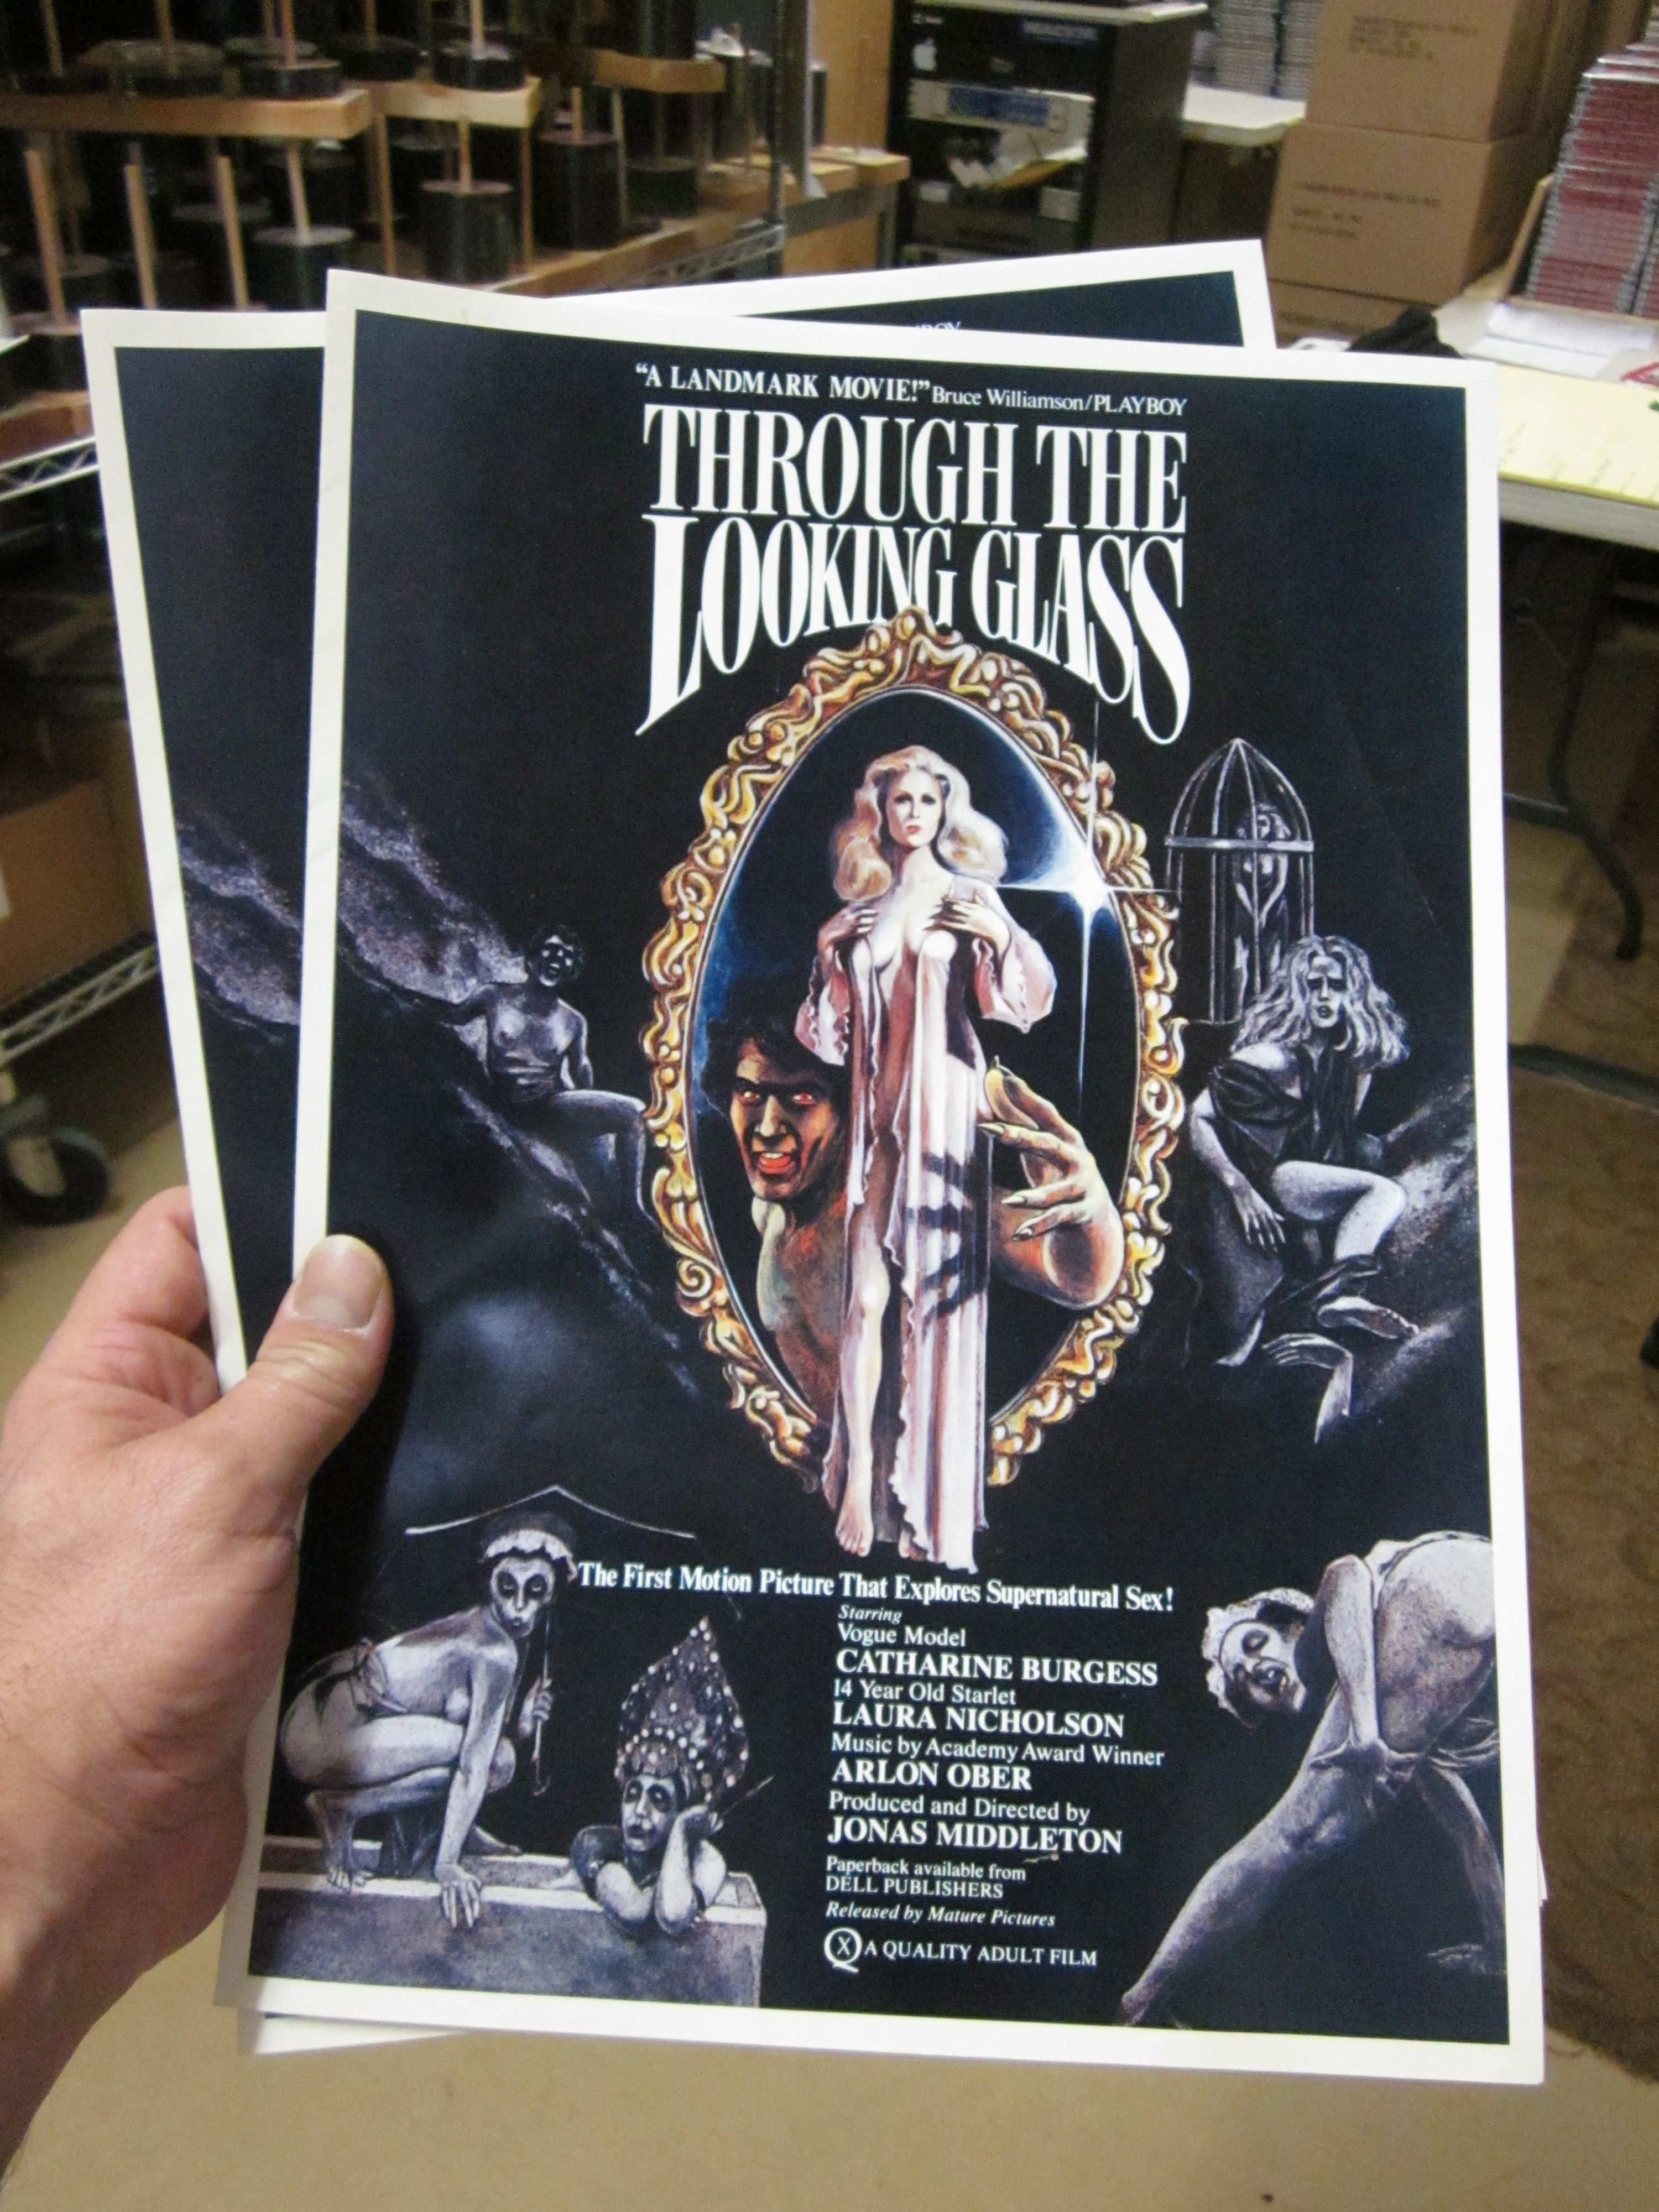 Original Press Books for Through The Looking Glass